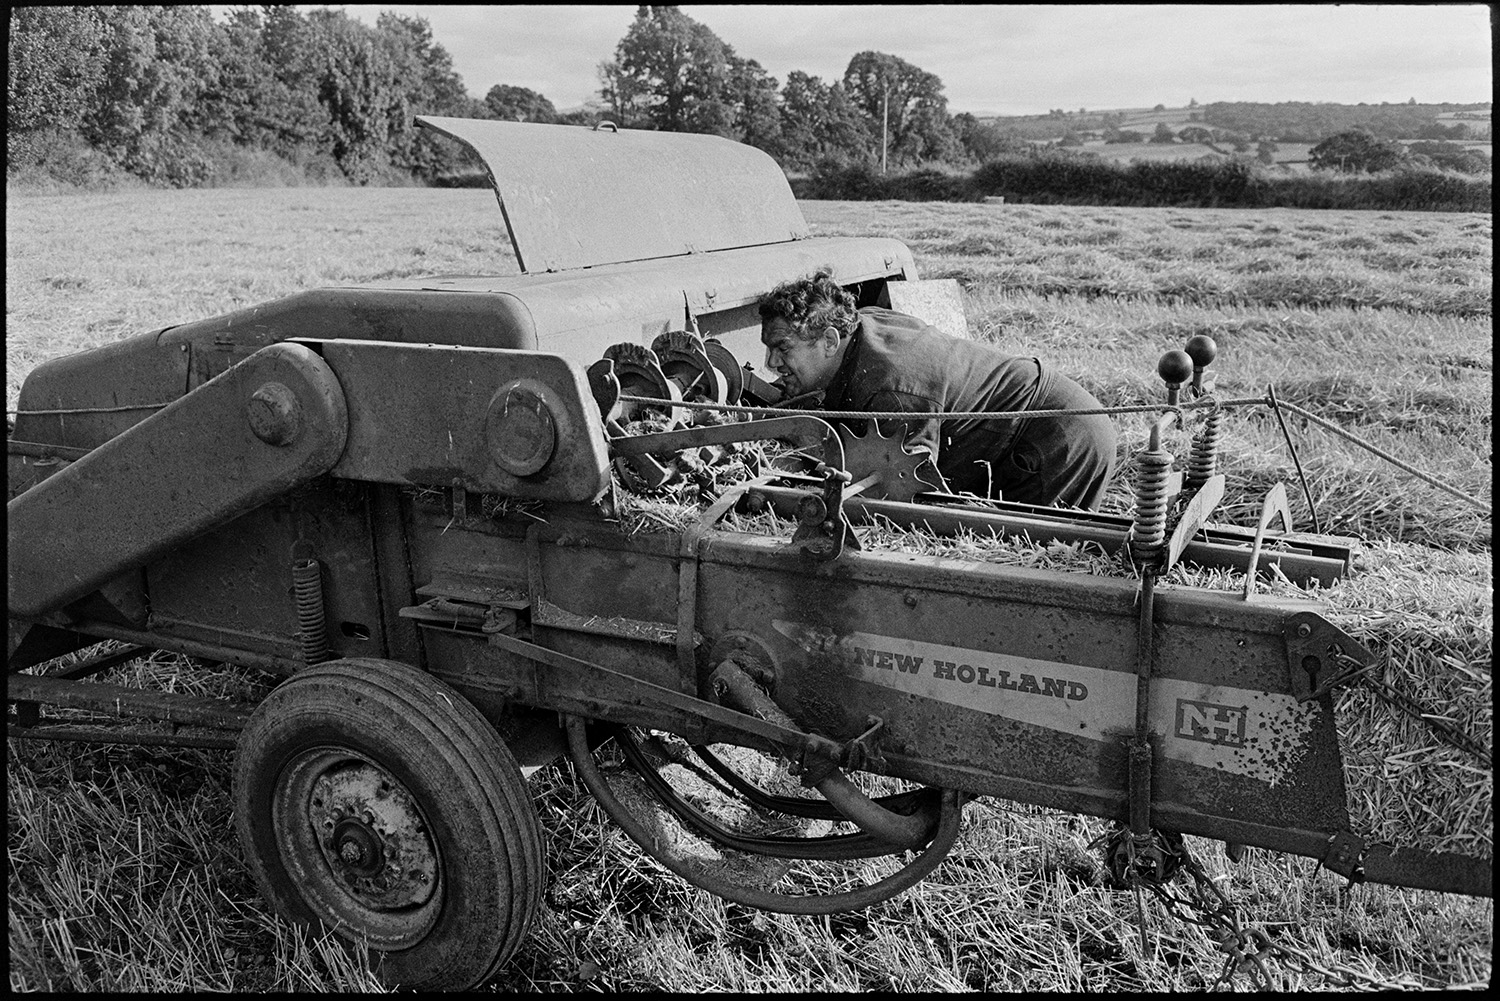 Mechanic checking baler. 
[Cyril Dunn checking the mechanics of a baler in a field at Parsonage, Iddesleigh. A bale of hay can be seen in the baler.]